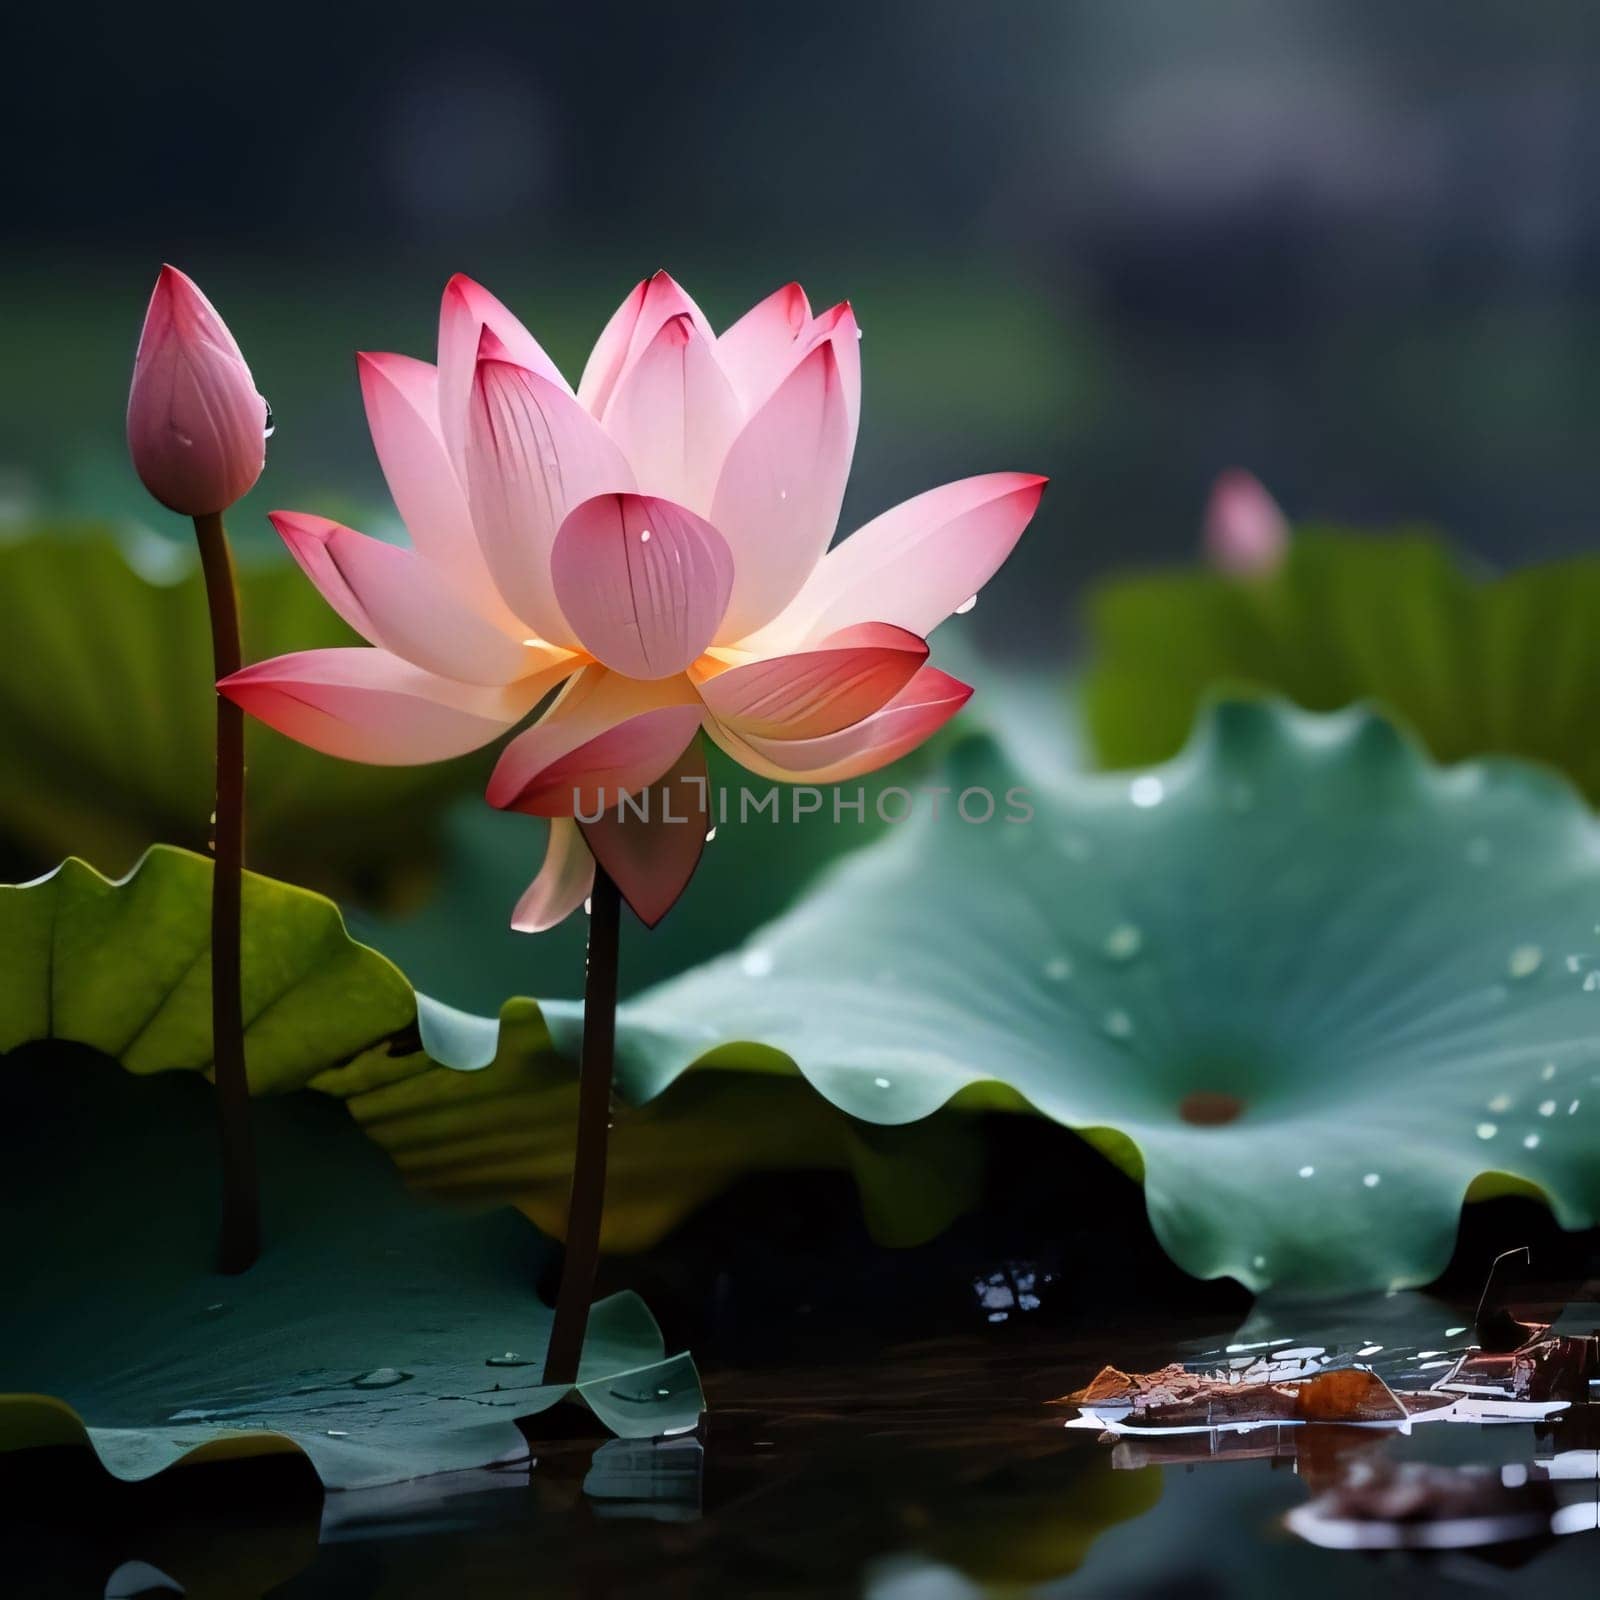 Pink water lily over water around green leaves. Flowering flowers, a symbol of spring, new life. A joyful time of nature waking up to life.